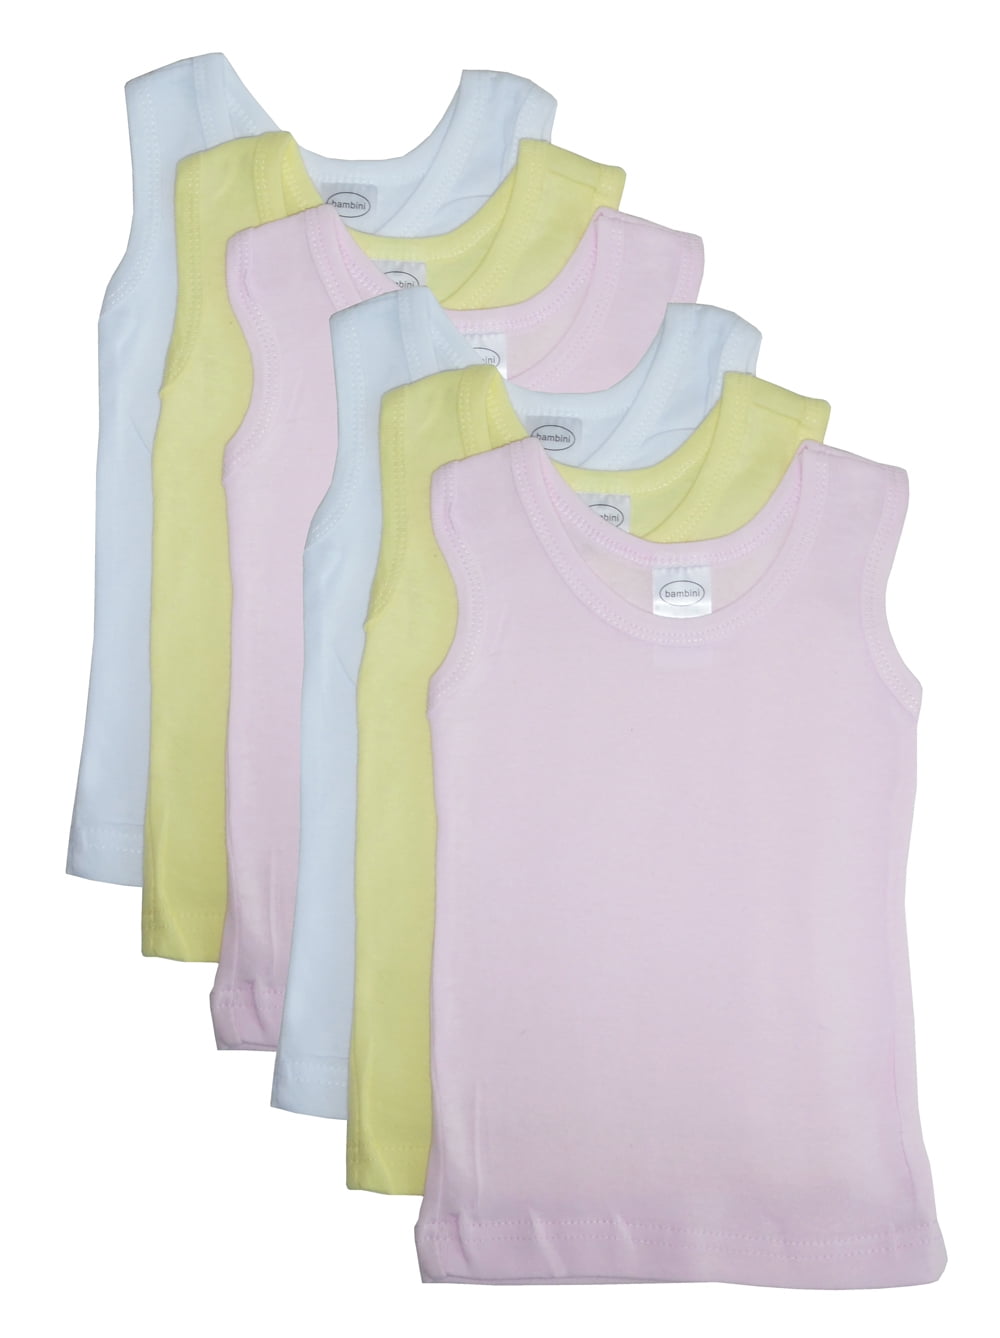 Sized 2 to 6 Toddler and Girls Pastel Ribbed Camisole Tank Top with Lace 